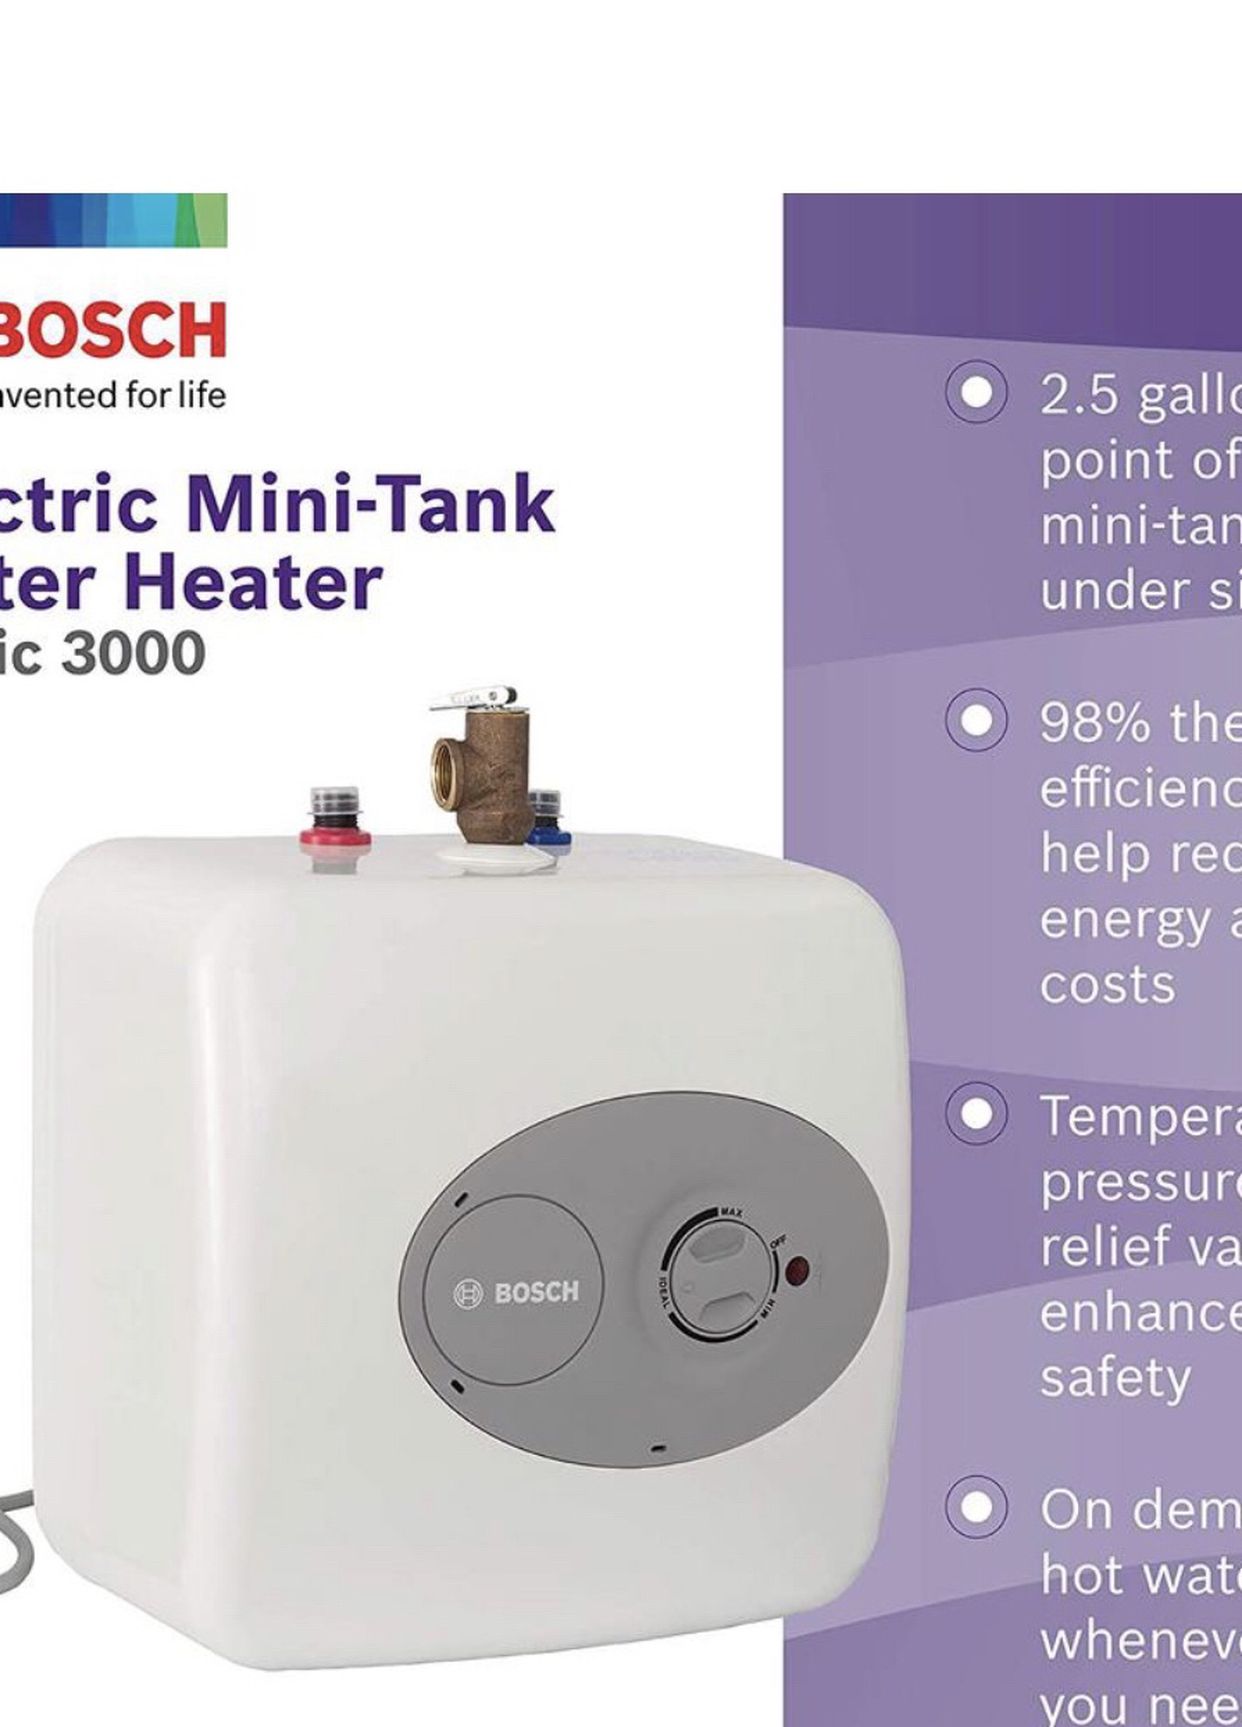 Bosch 2.5 Gal. Electric Point-of-Use Water Heater. Retail: $157.54+tax. Our Price: $99.